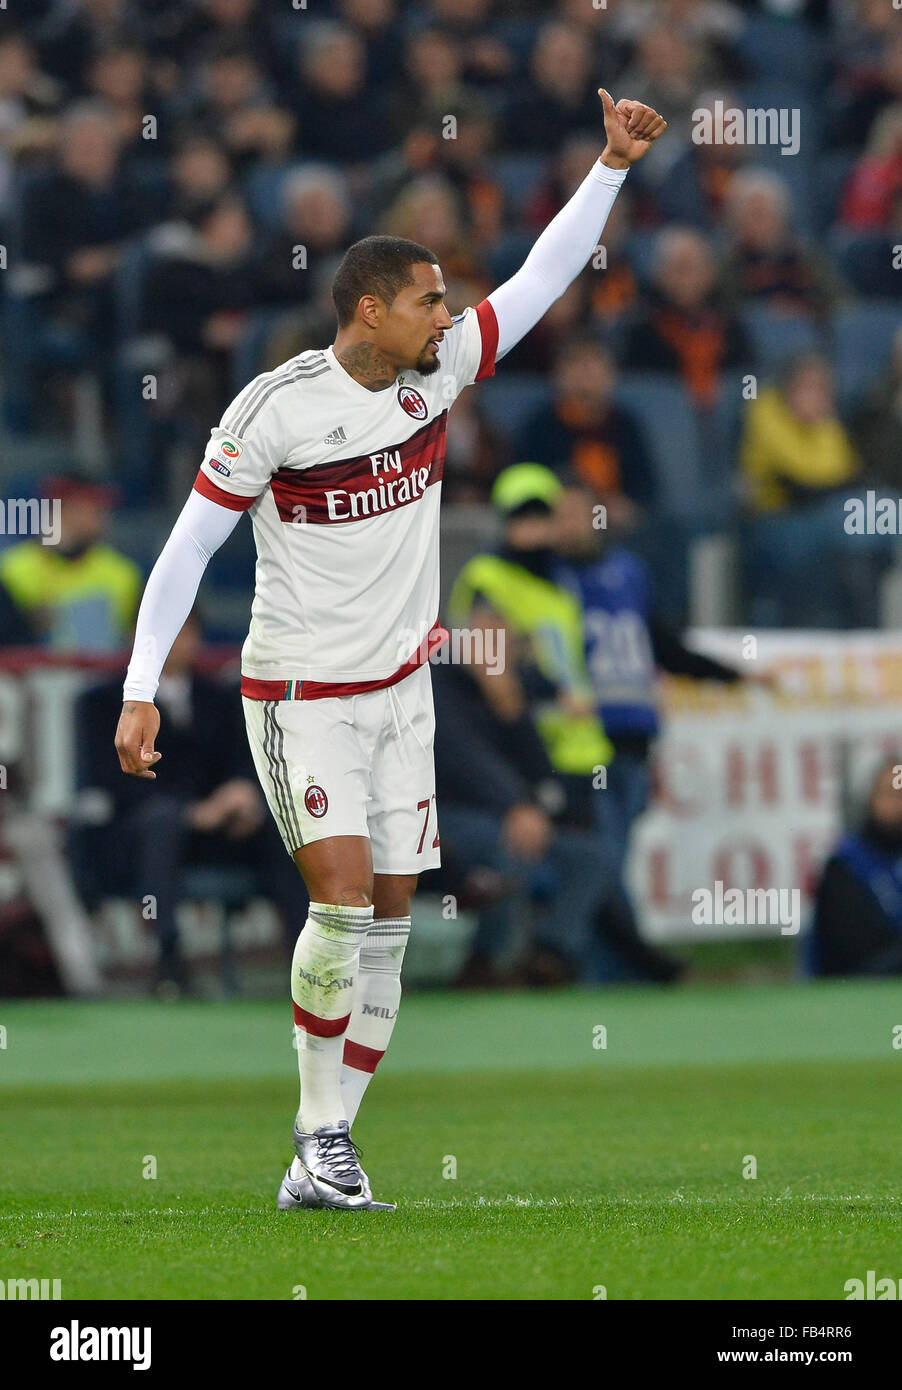 Rome, Italy. 09th Jan, 2016. Kevin Prince Boateng during the Italian Serie A football match A.S. Roma vs A.C. Milan at the Olympic Stadium in Rome, on january 09, 2016 Credit:  Silvia Lore'/Alamy Live News Stock Photo